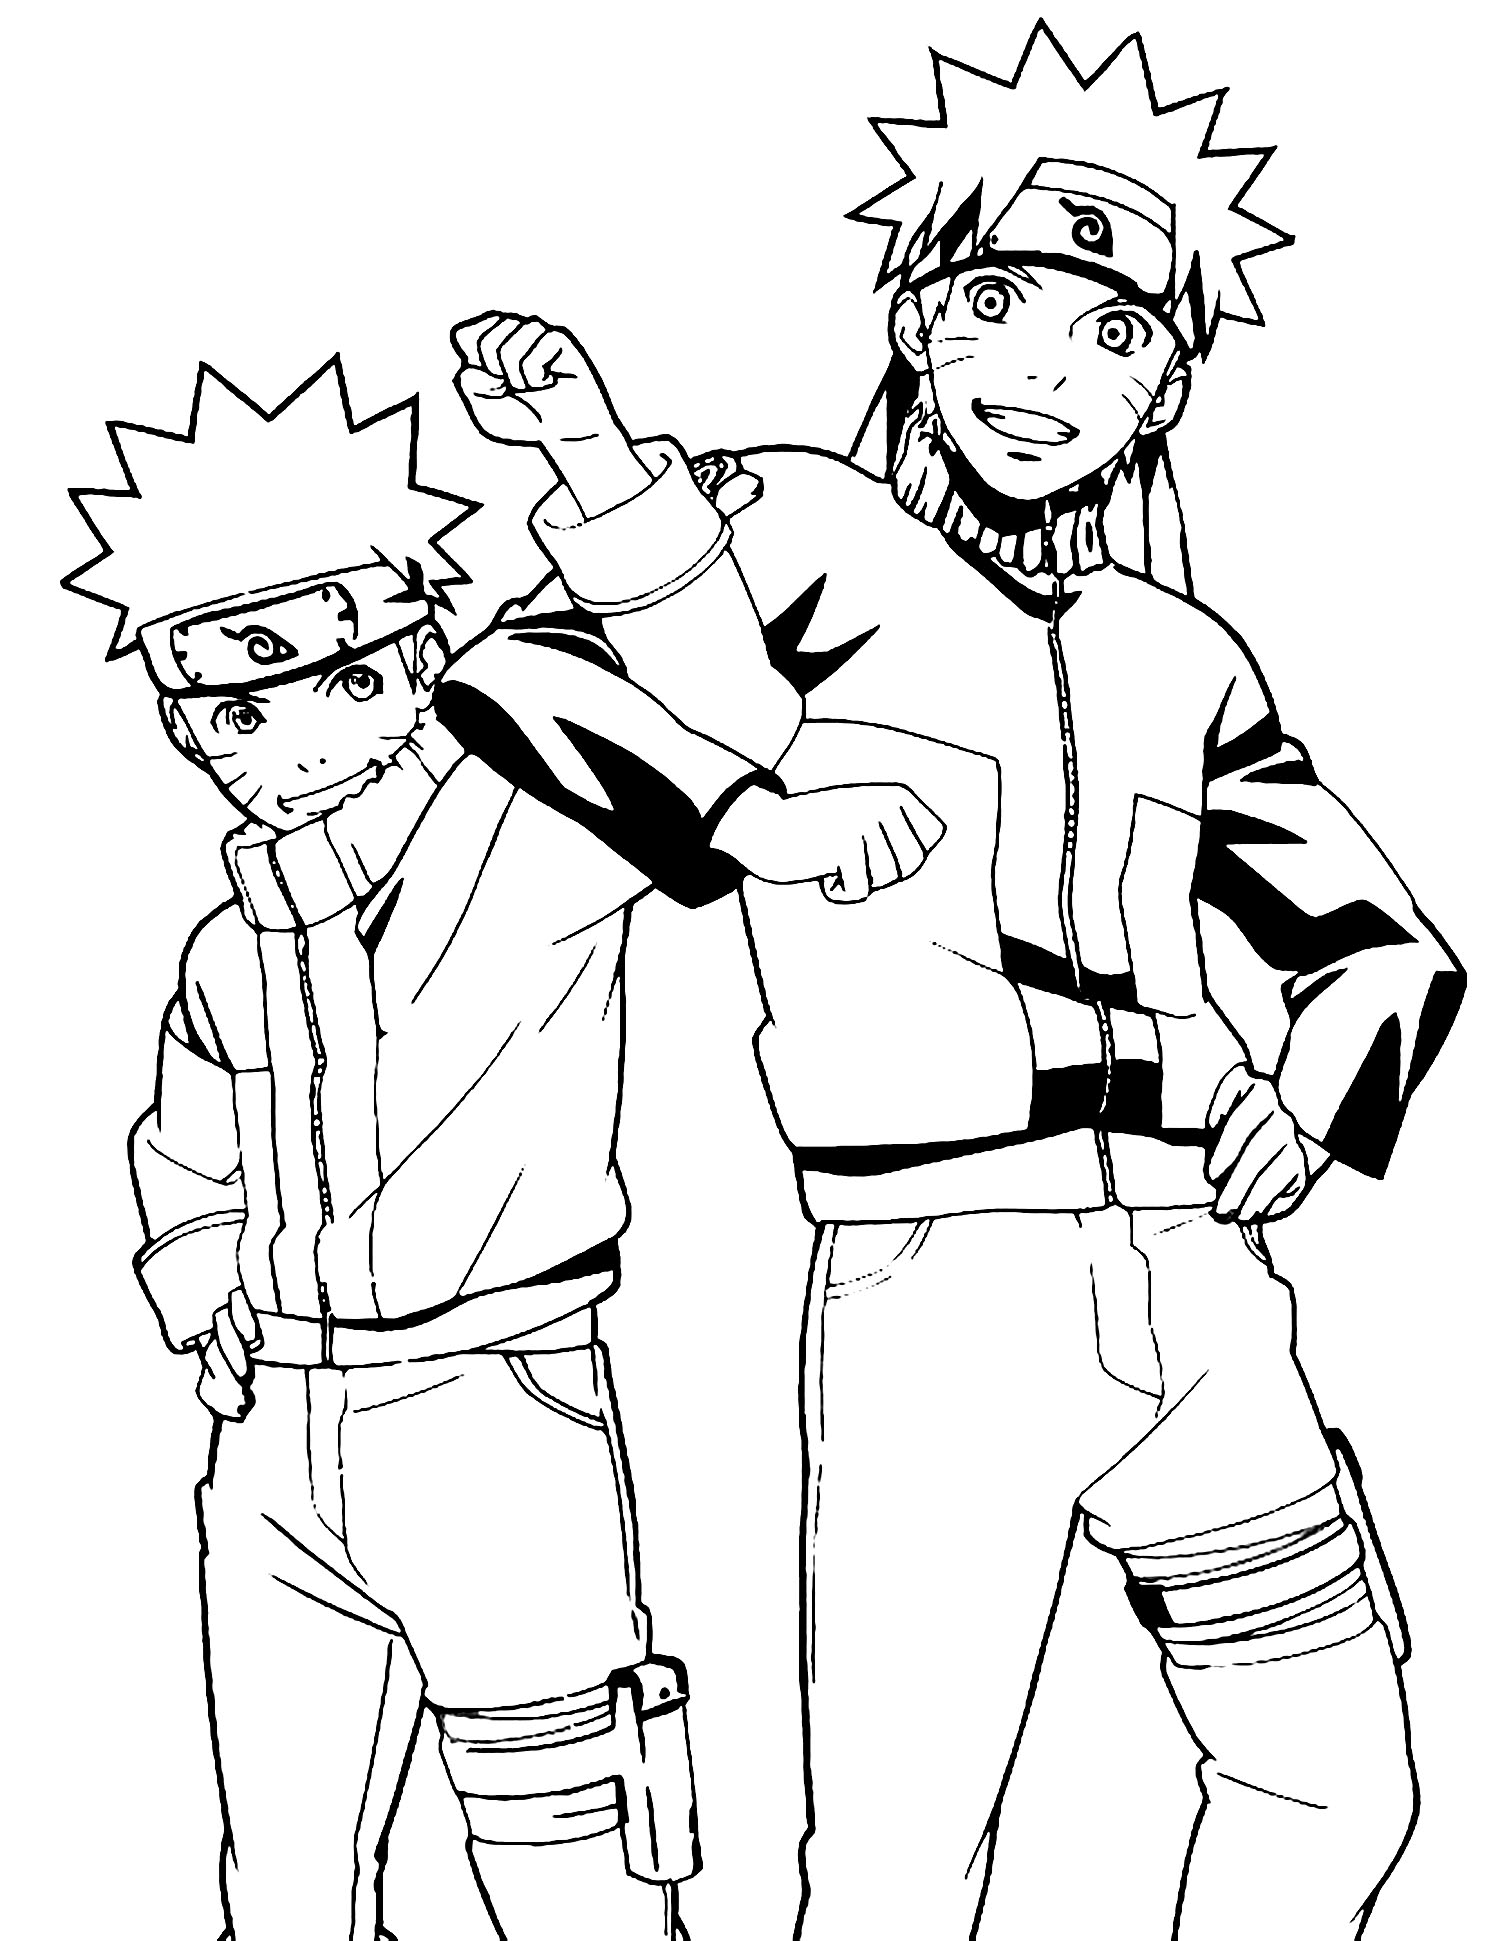 Download Naruto to color for children - Naruto Kids Coloring Pages